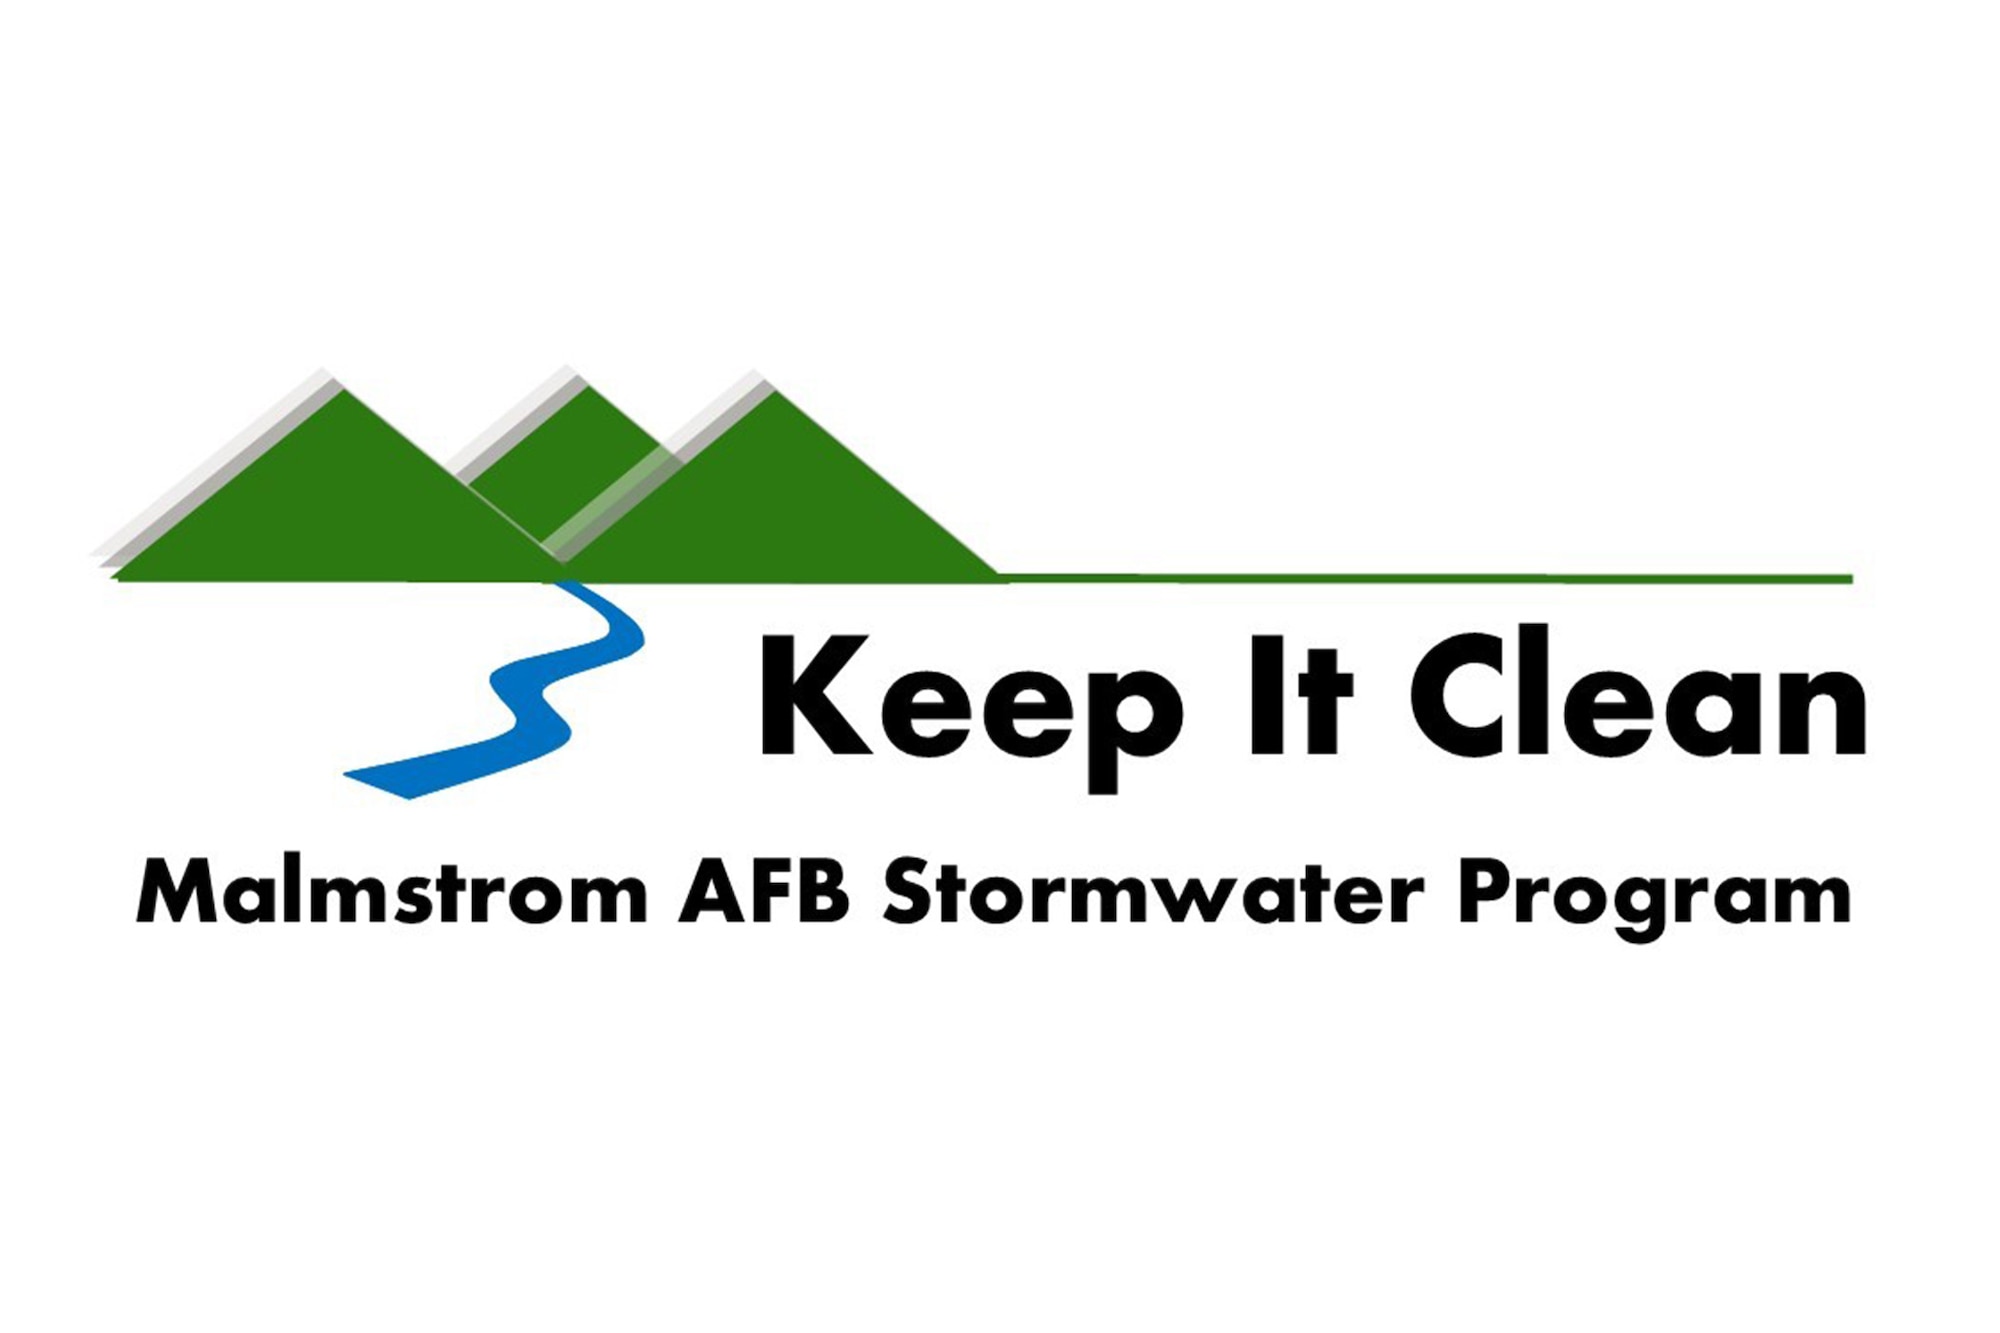 Malmstrom Air Force Base operates under a Municipal Separate Storm Sewer System permit from the Montana Department of Environmental Quality.